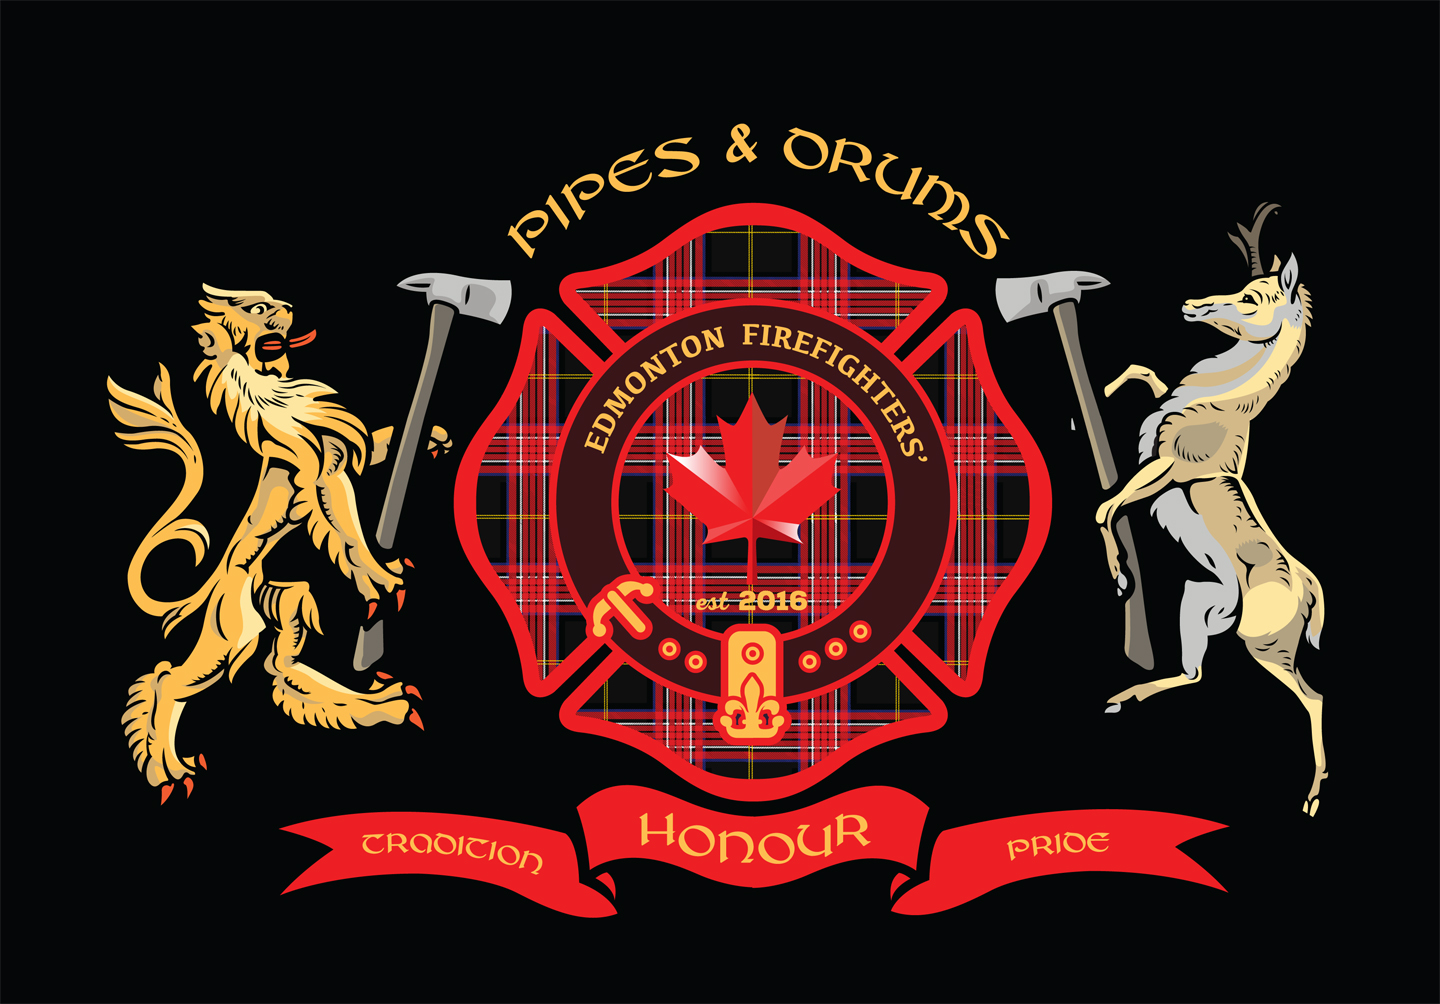 Edmonton Firefighters Pipes and Drums appoint the first Pipe and Drum Sergeant's